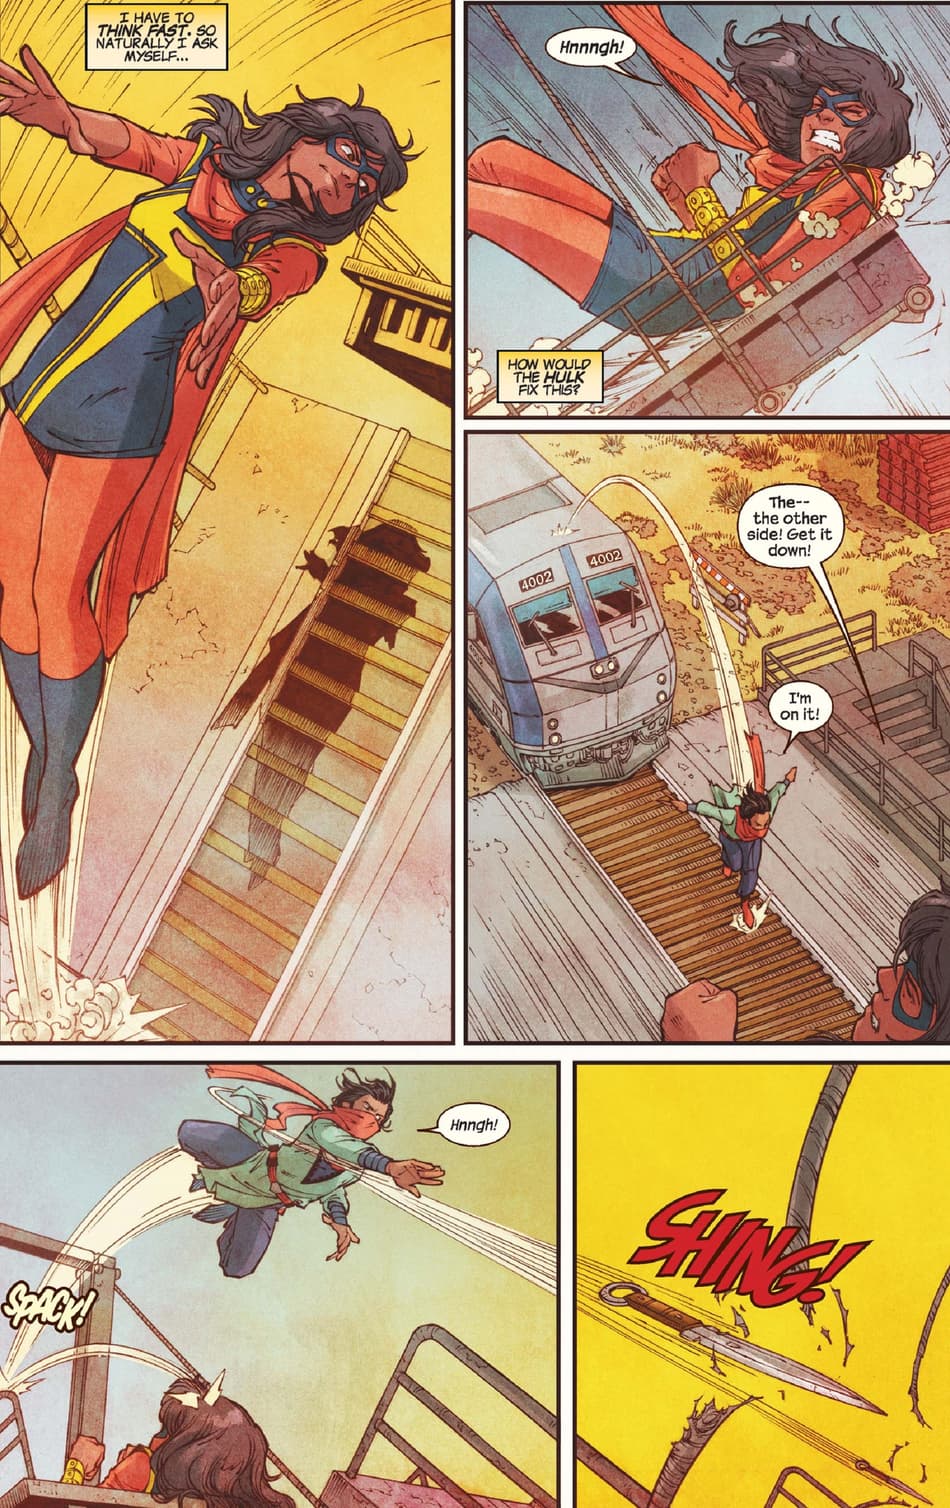 Red Dagger shows off his marksmanship in MS. MARVEL (2015) #23.